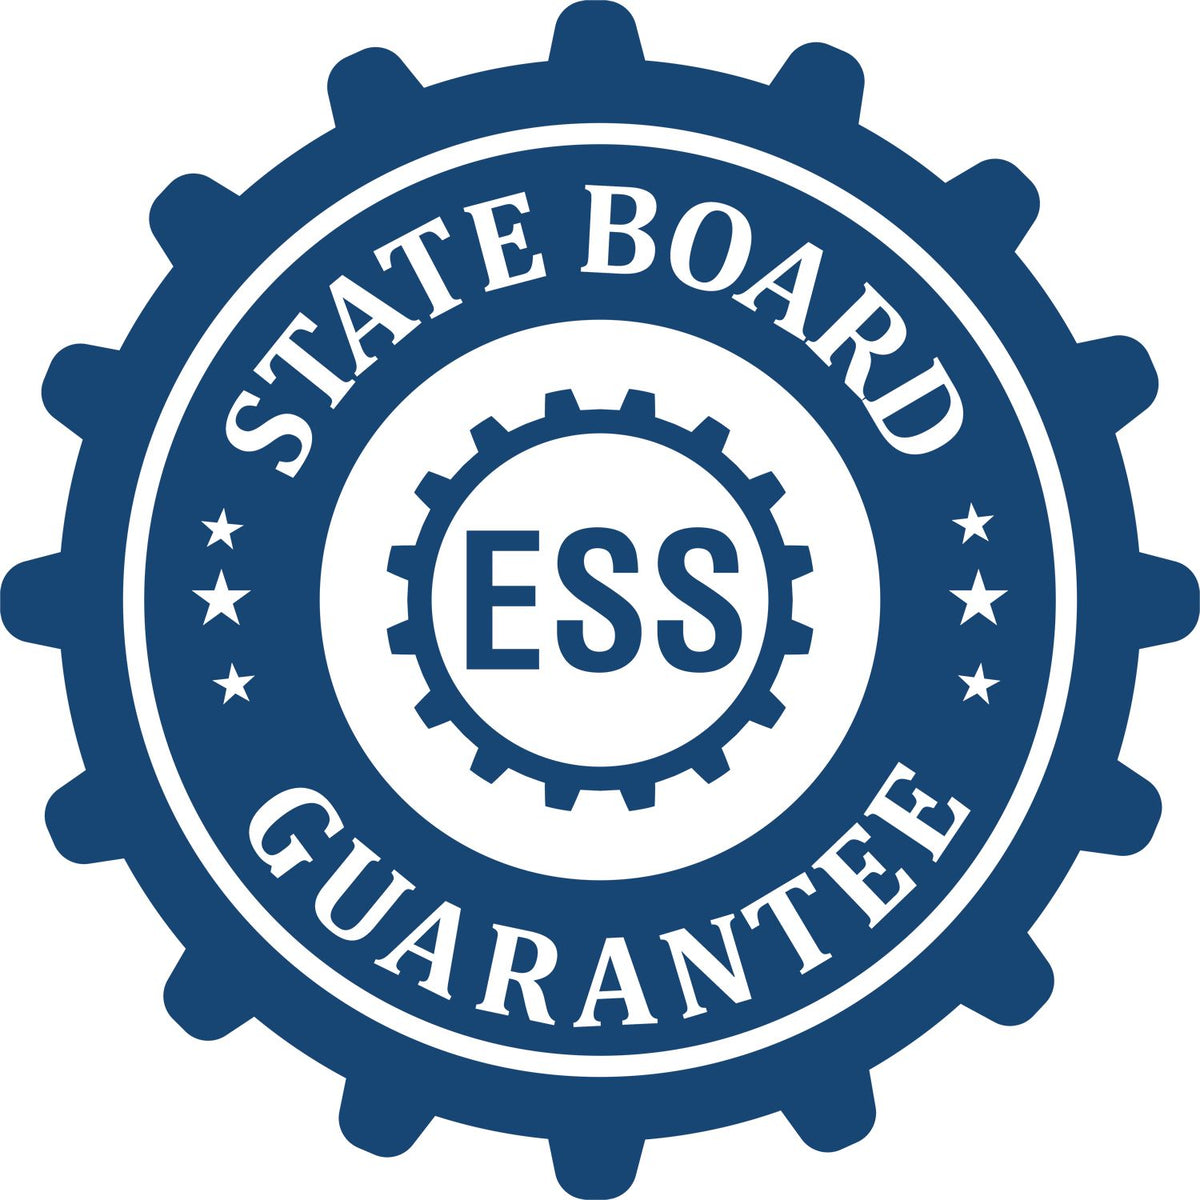 An emblem in a gear shape illustrating a state board guarantee for the Gift Nevada Geologist Seal